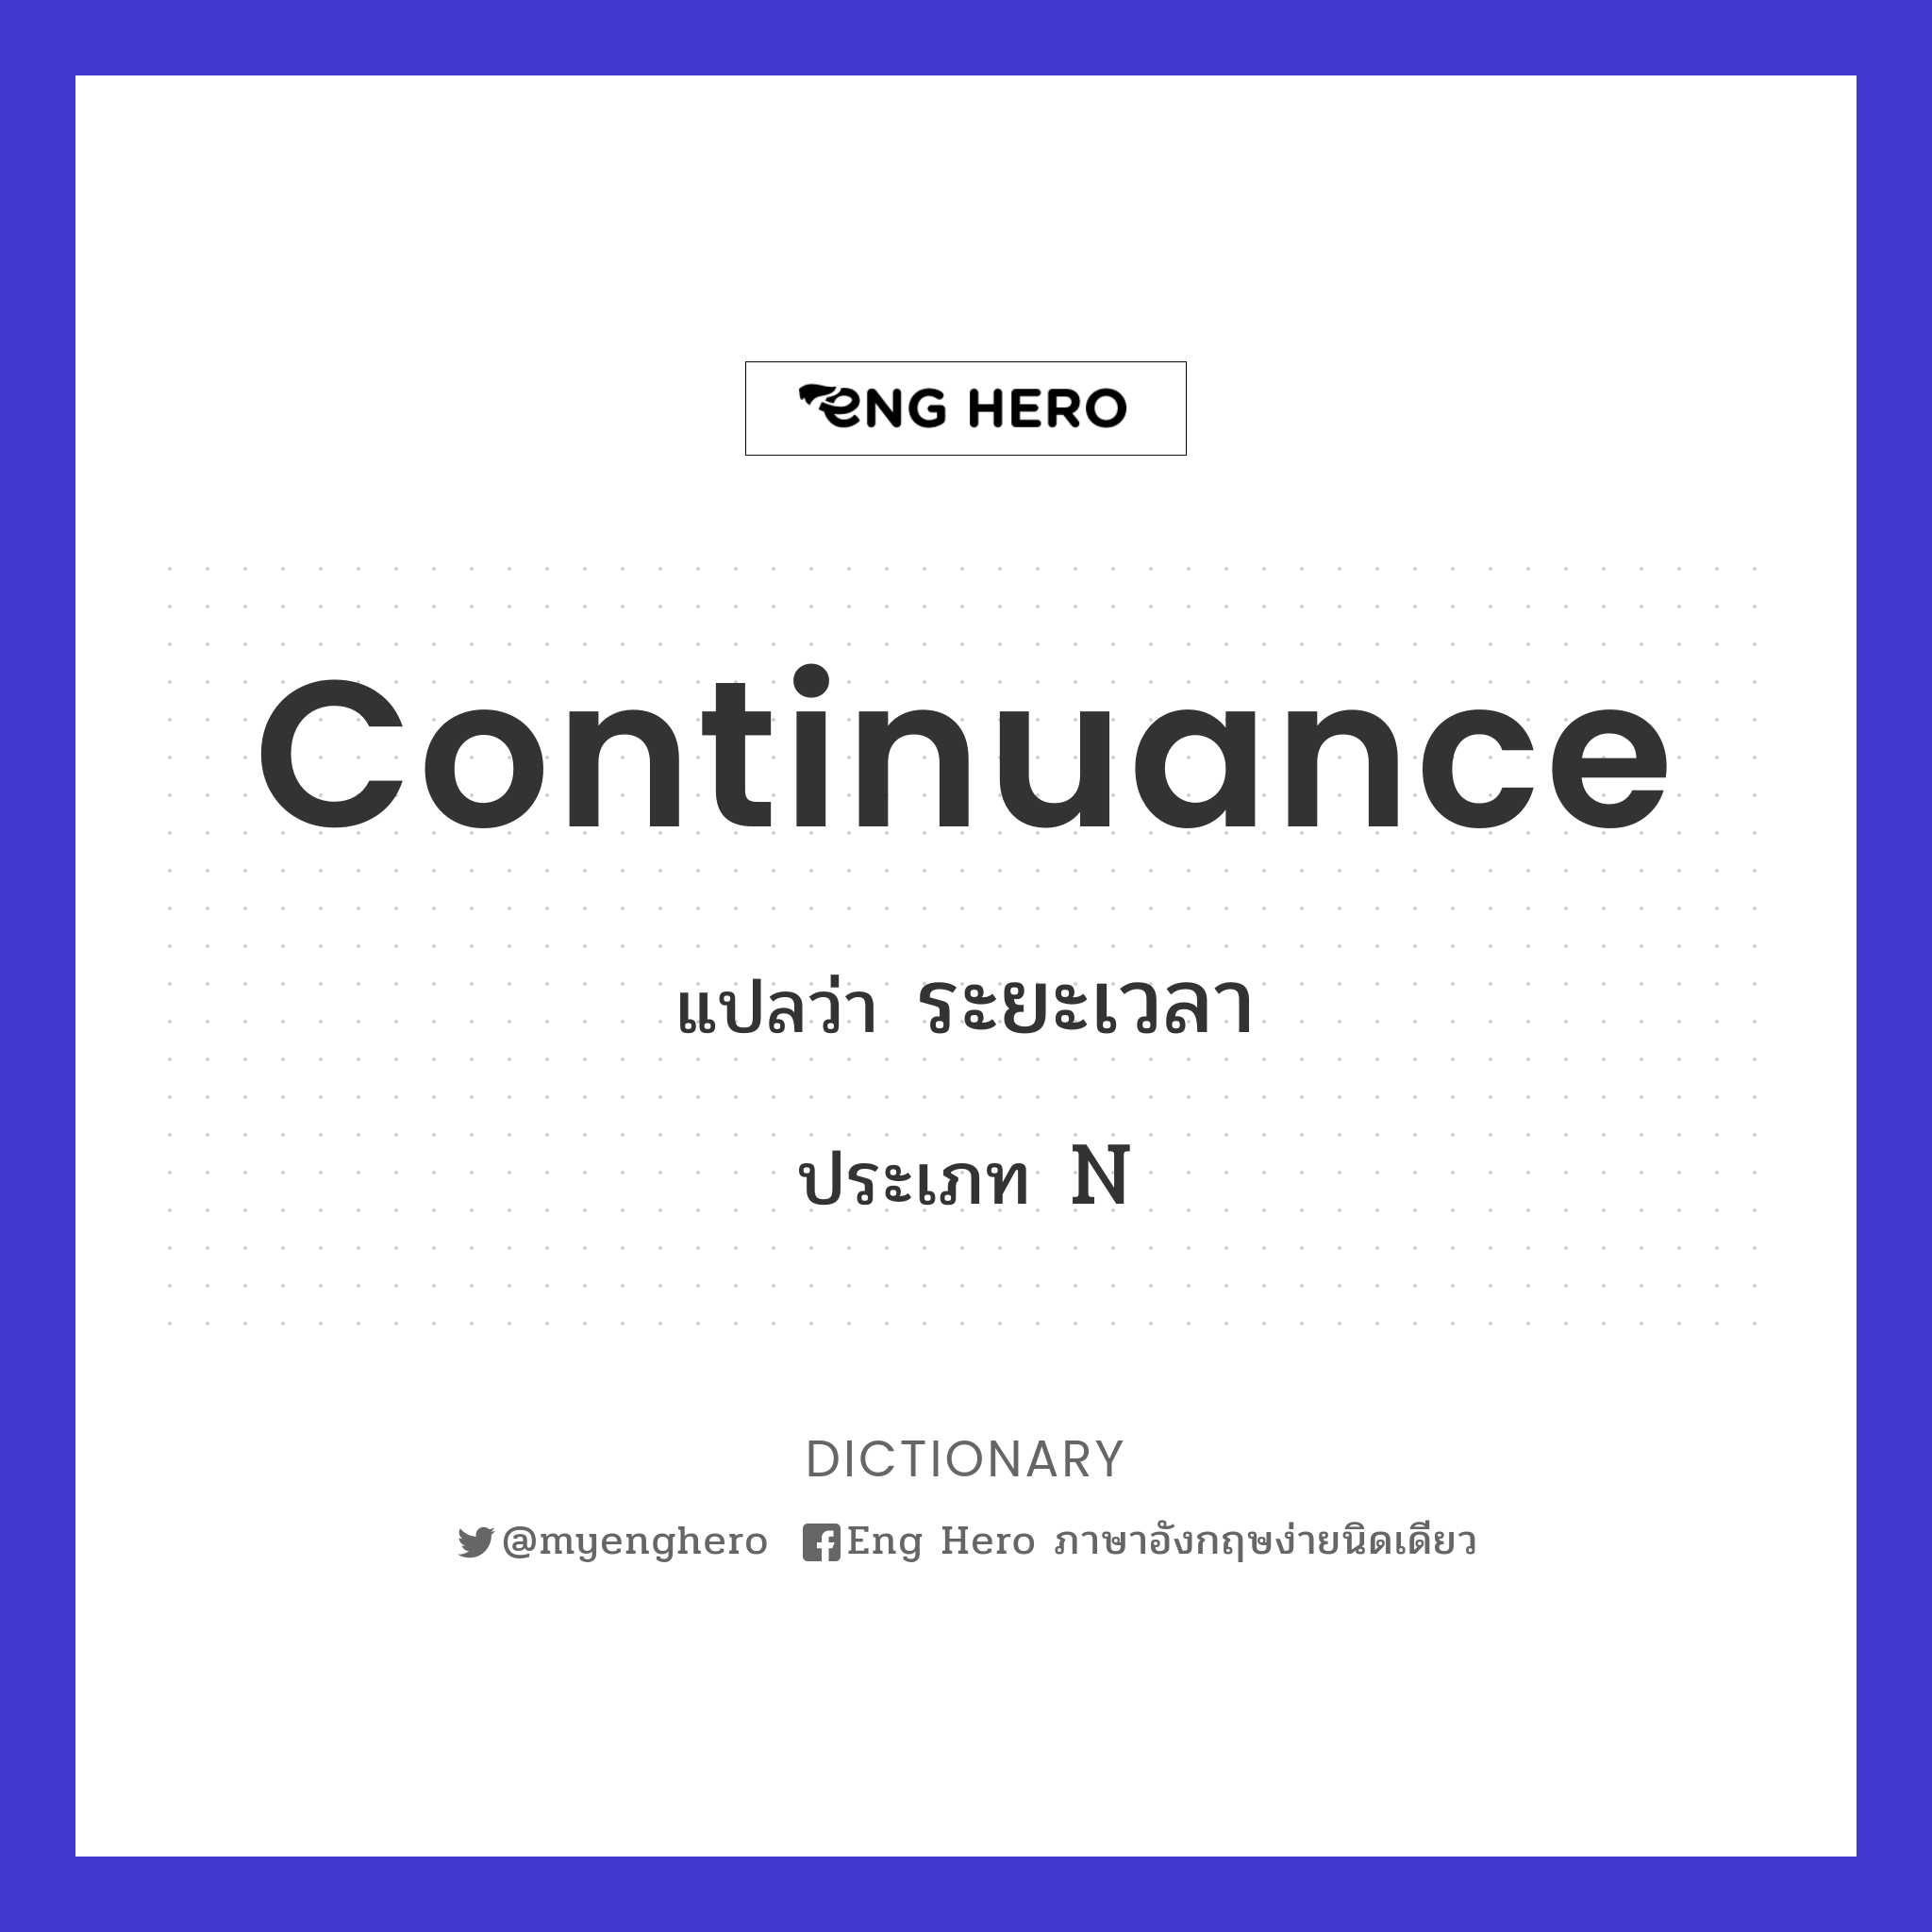 continuance